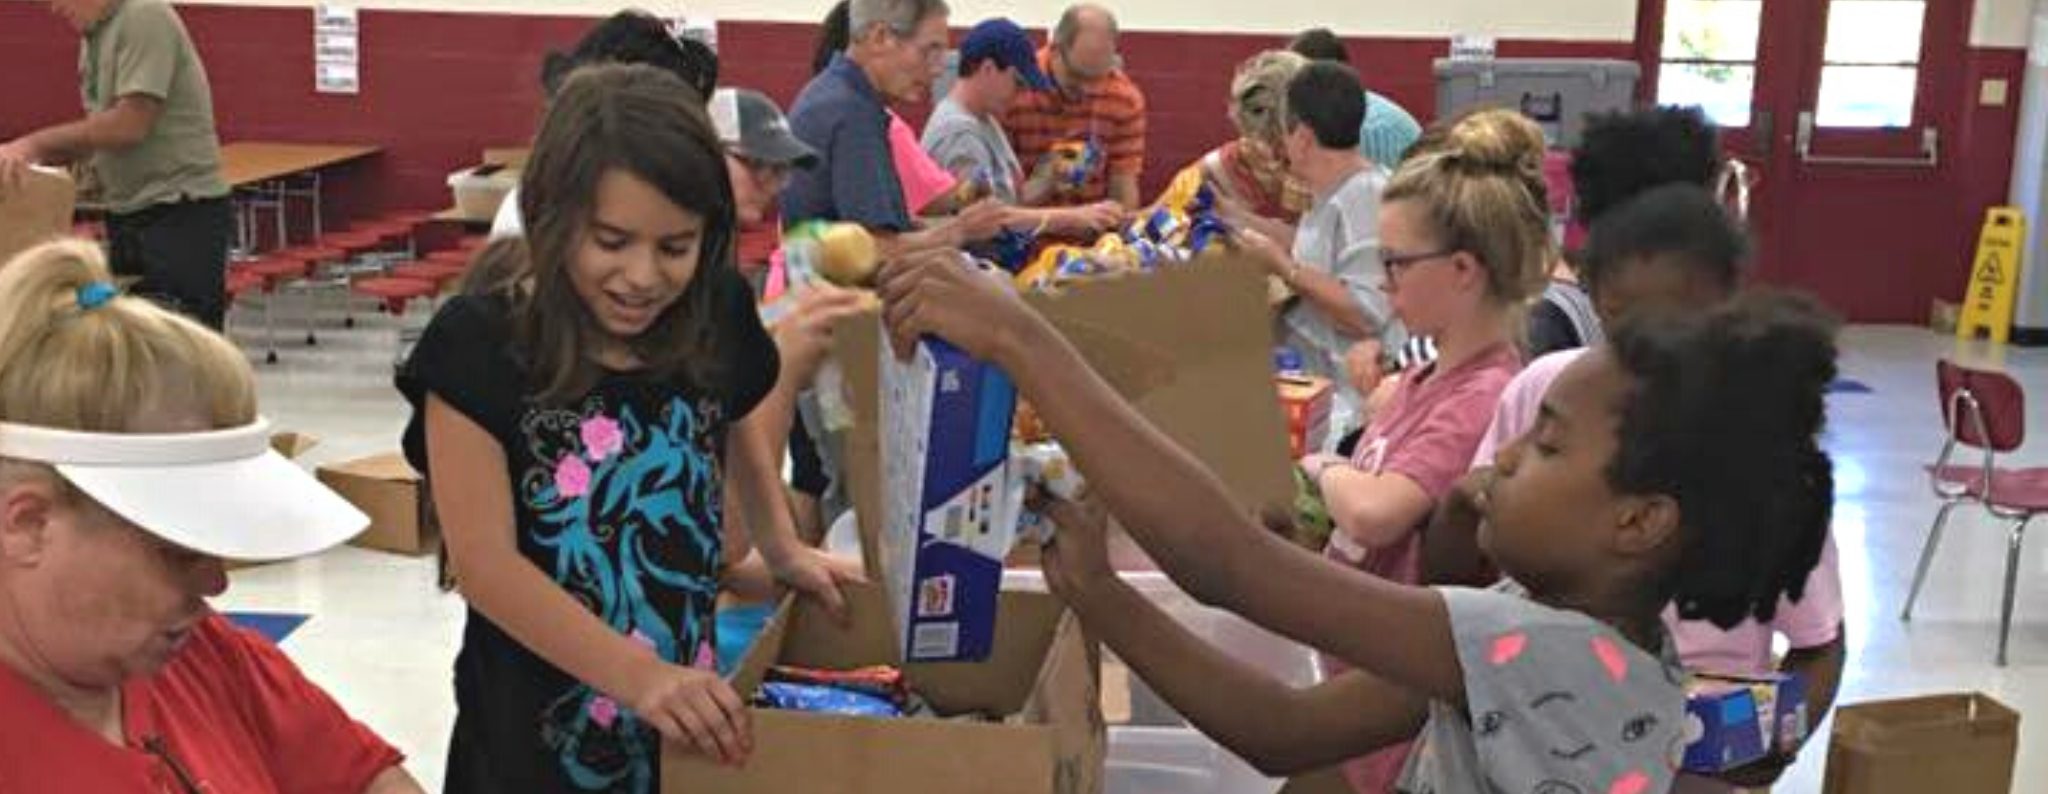 A Tight-Knit Community in Alabama Feeds Kids on the weekend